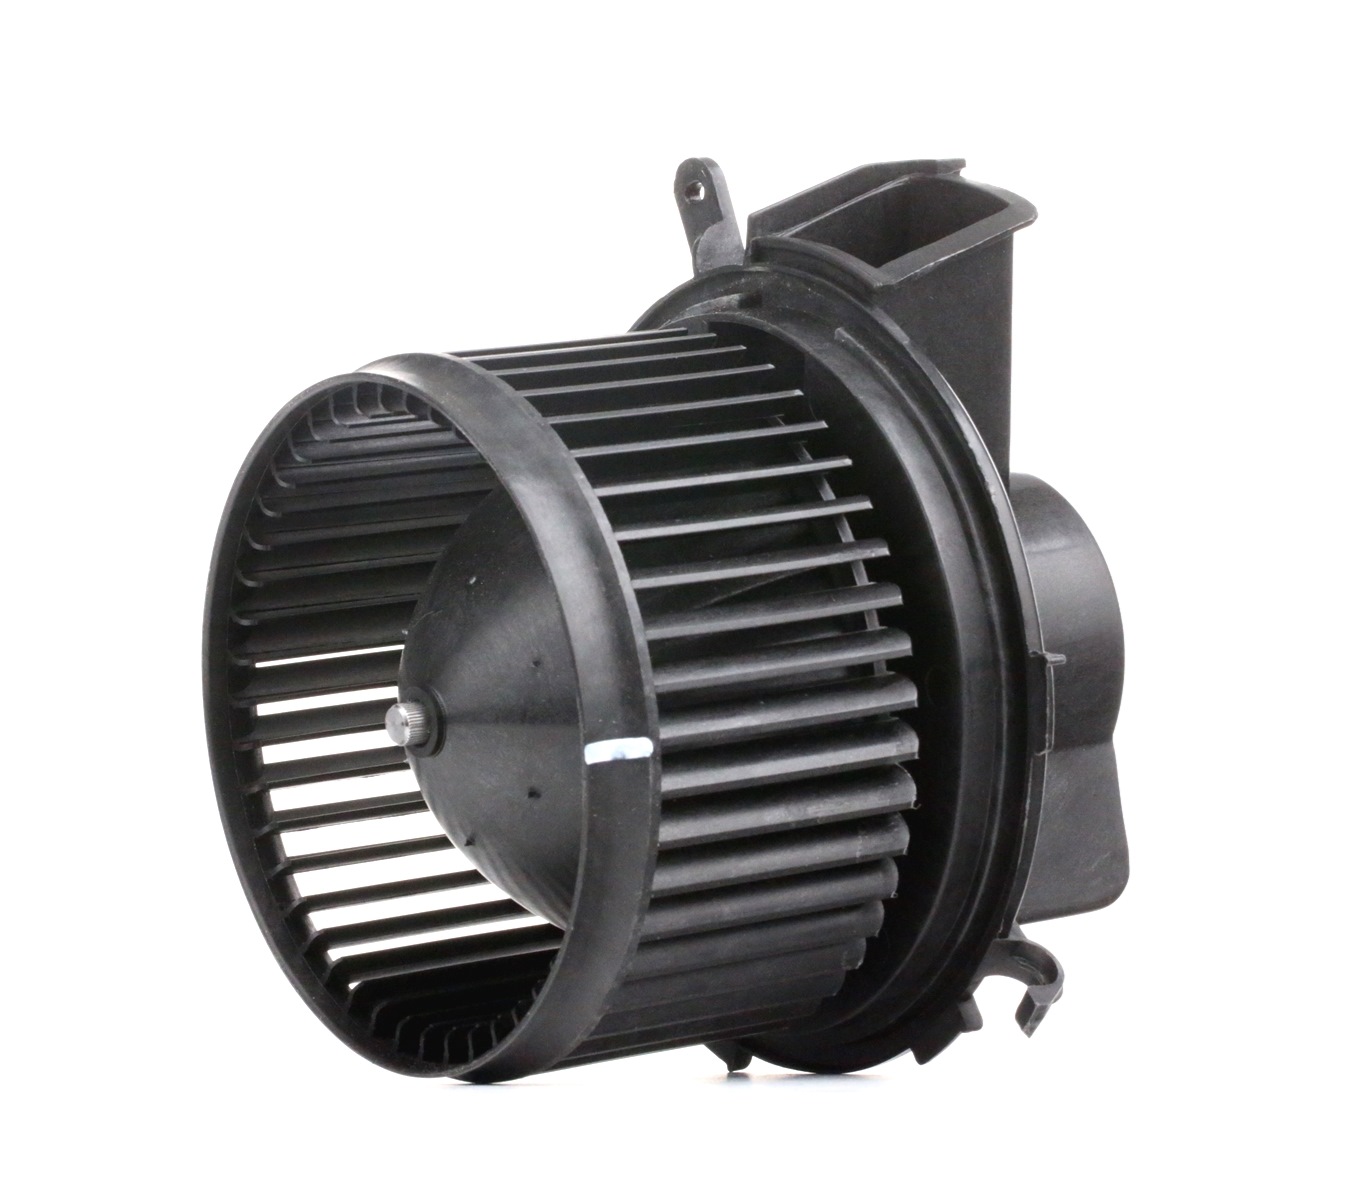 SKIB-0310049 STARK Heater blower motor FIAT for vehicles with air conditioning (manually controlled), for left-hand drive vehicles